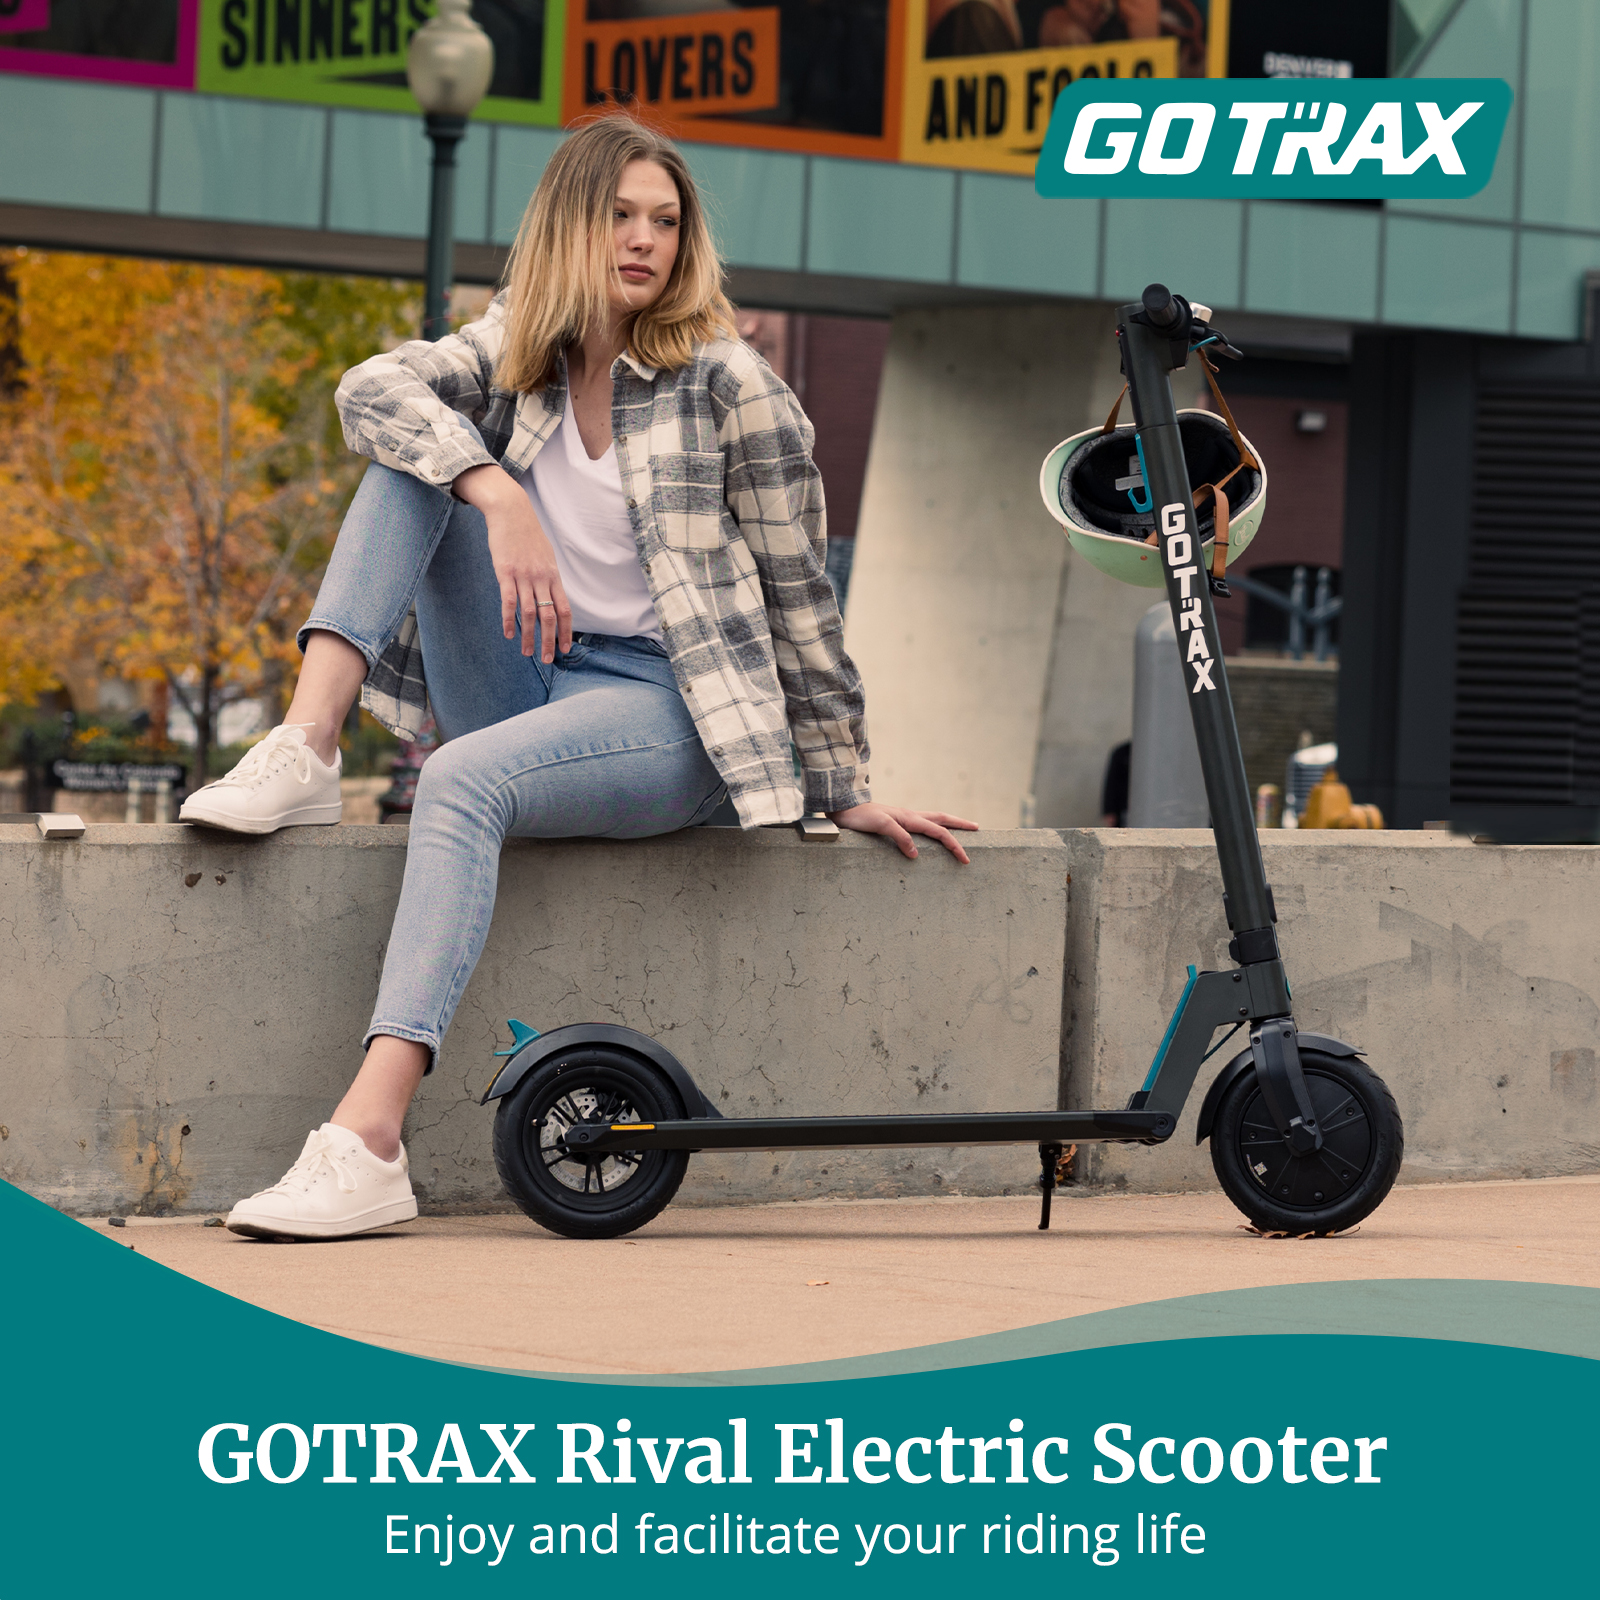 GOTRAX Rival Adult Electric Scooter, 8.5" Pneumatic Tire, Max 12 mile Range and 15.5Mph Speed, 250W Foldable Escooter for Adult, Charcoal Gray - image 4 of 10